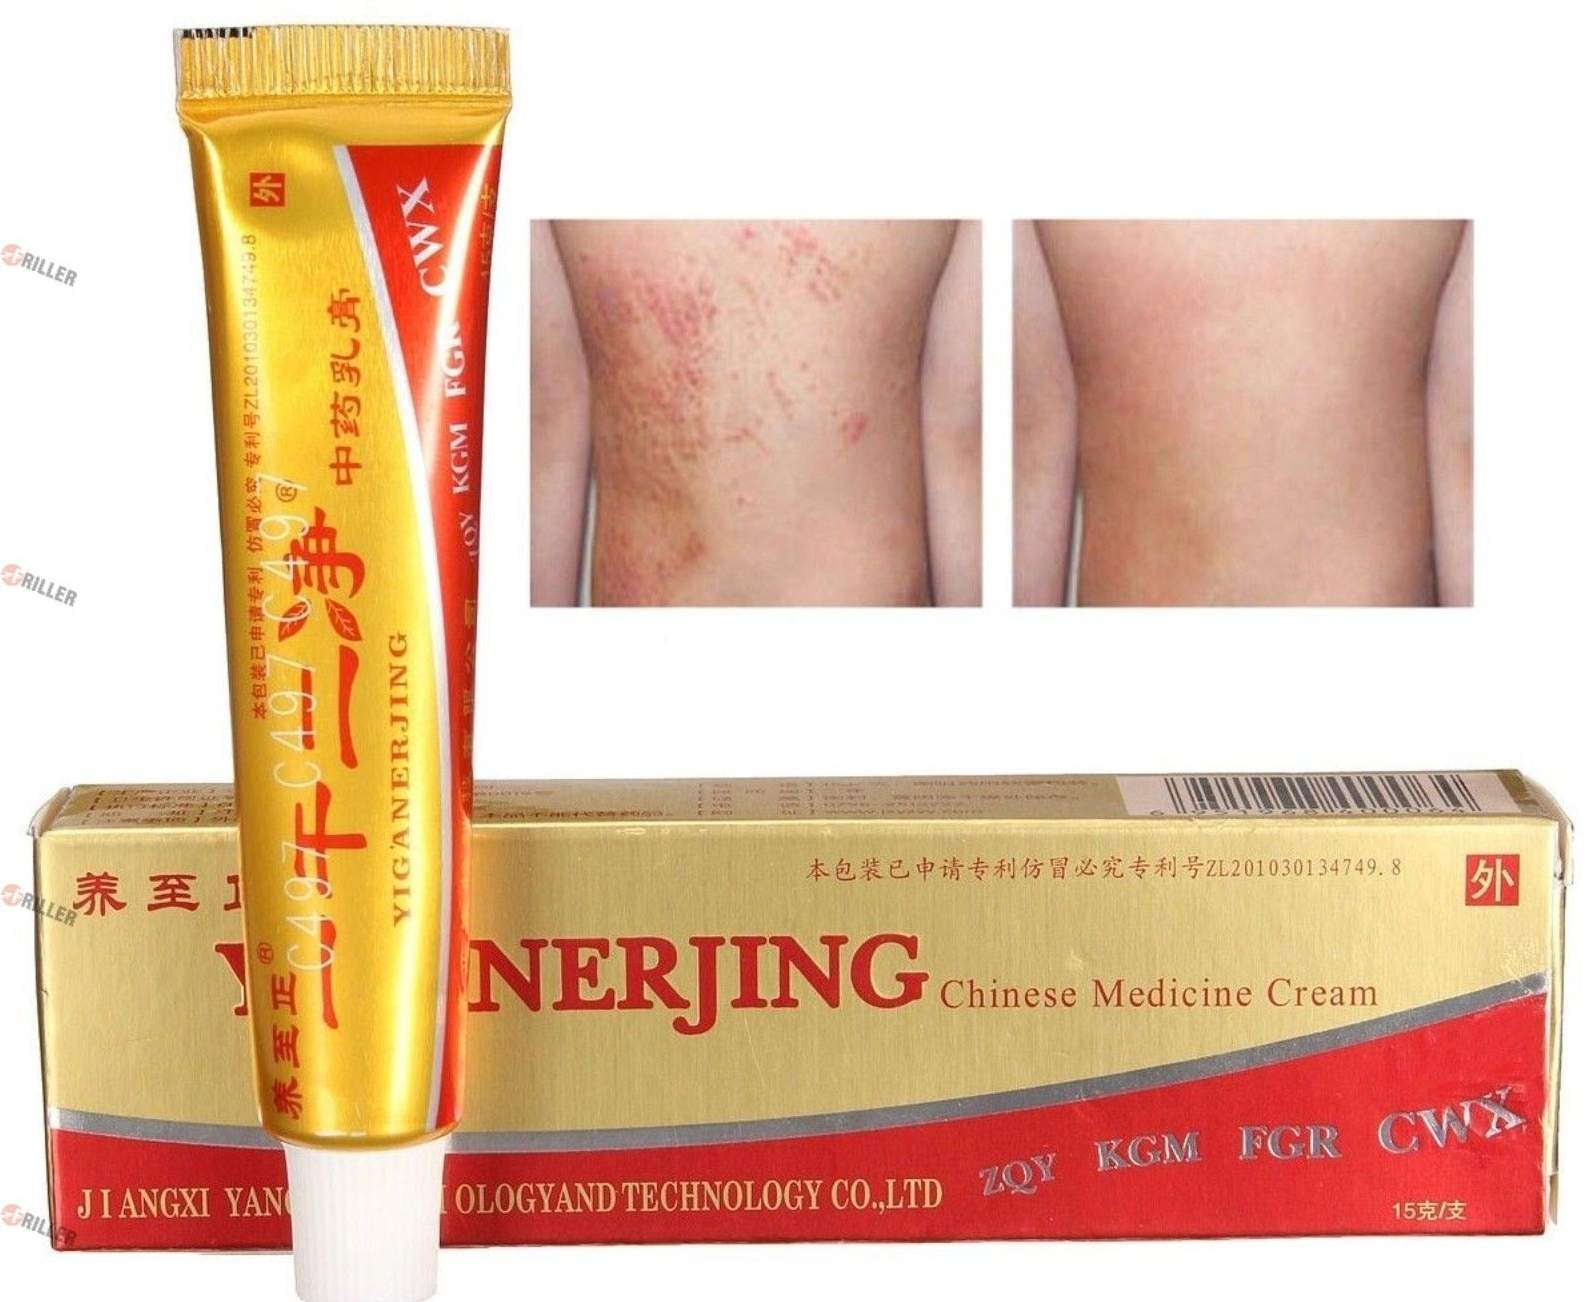 Chinese Dermatitis Psoriasis Cure Cream That’s Effective